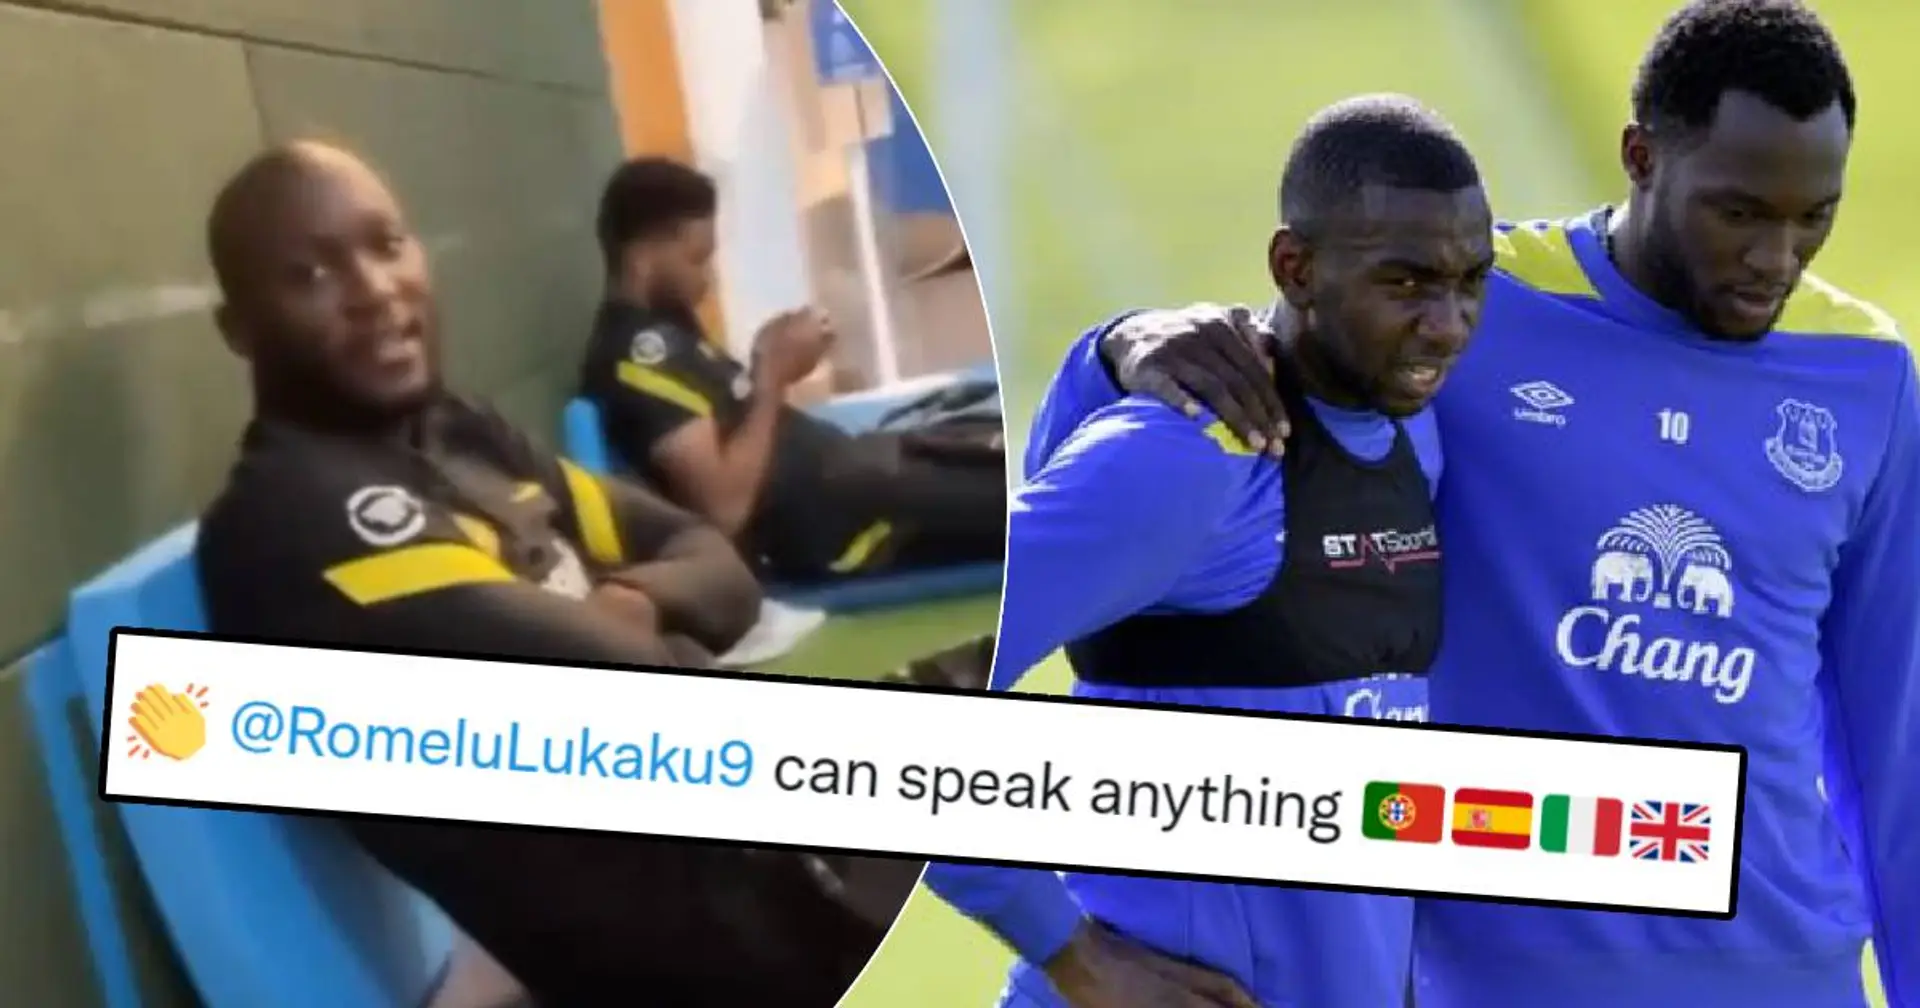 Lukaku speaks 8 languages including a 'secret' one - Explaining which ones they are 